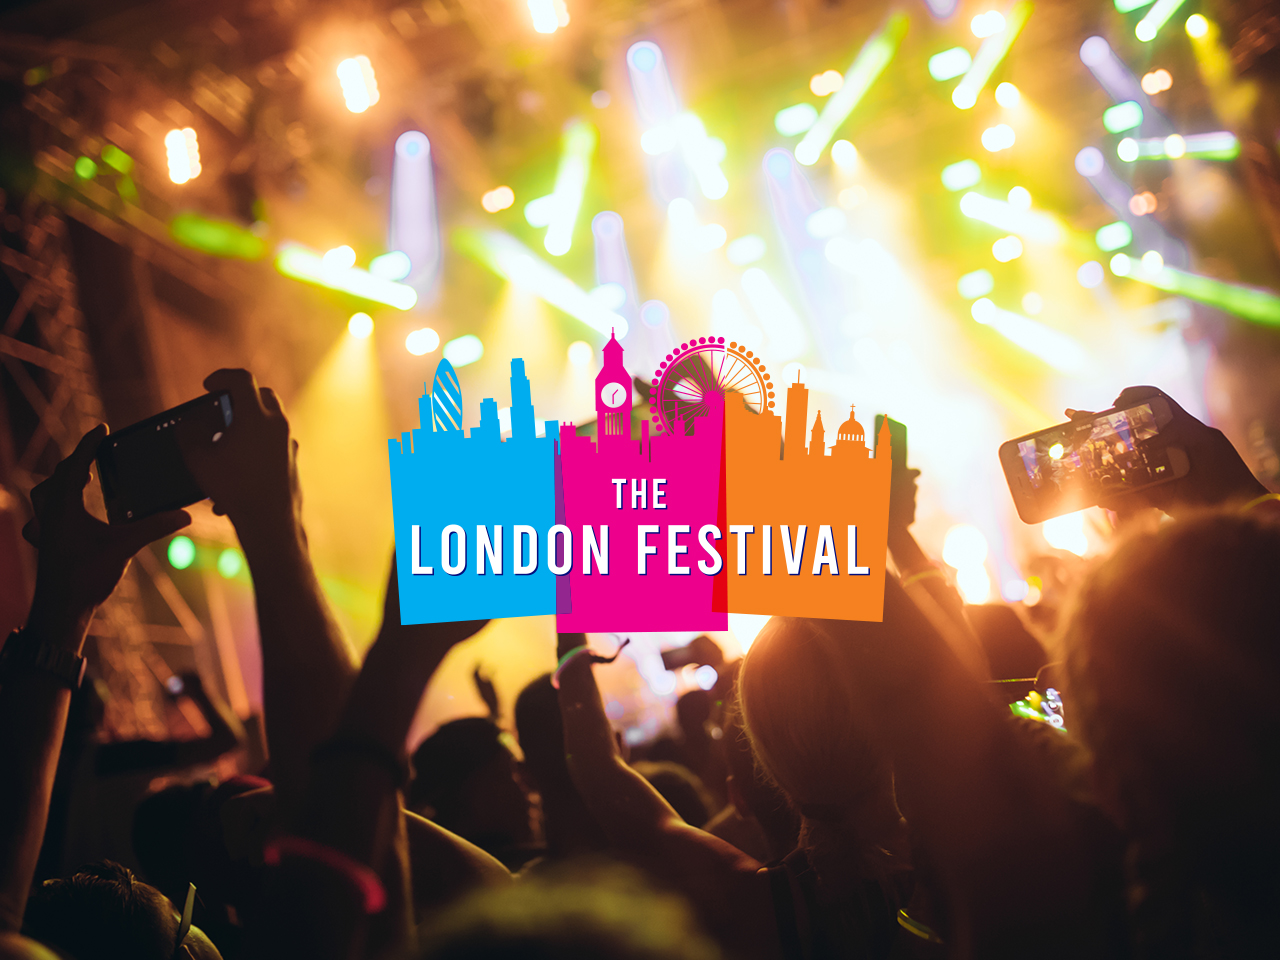 The London Festival® Organisers Open Opportunity for Local Artists to Perform at Major London Festival